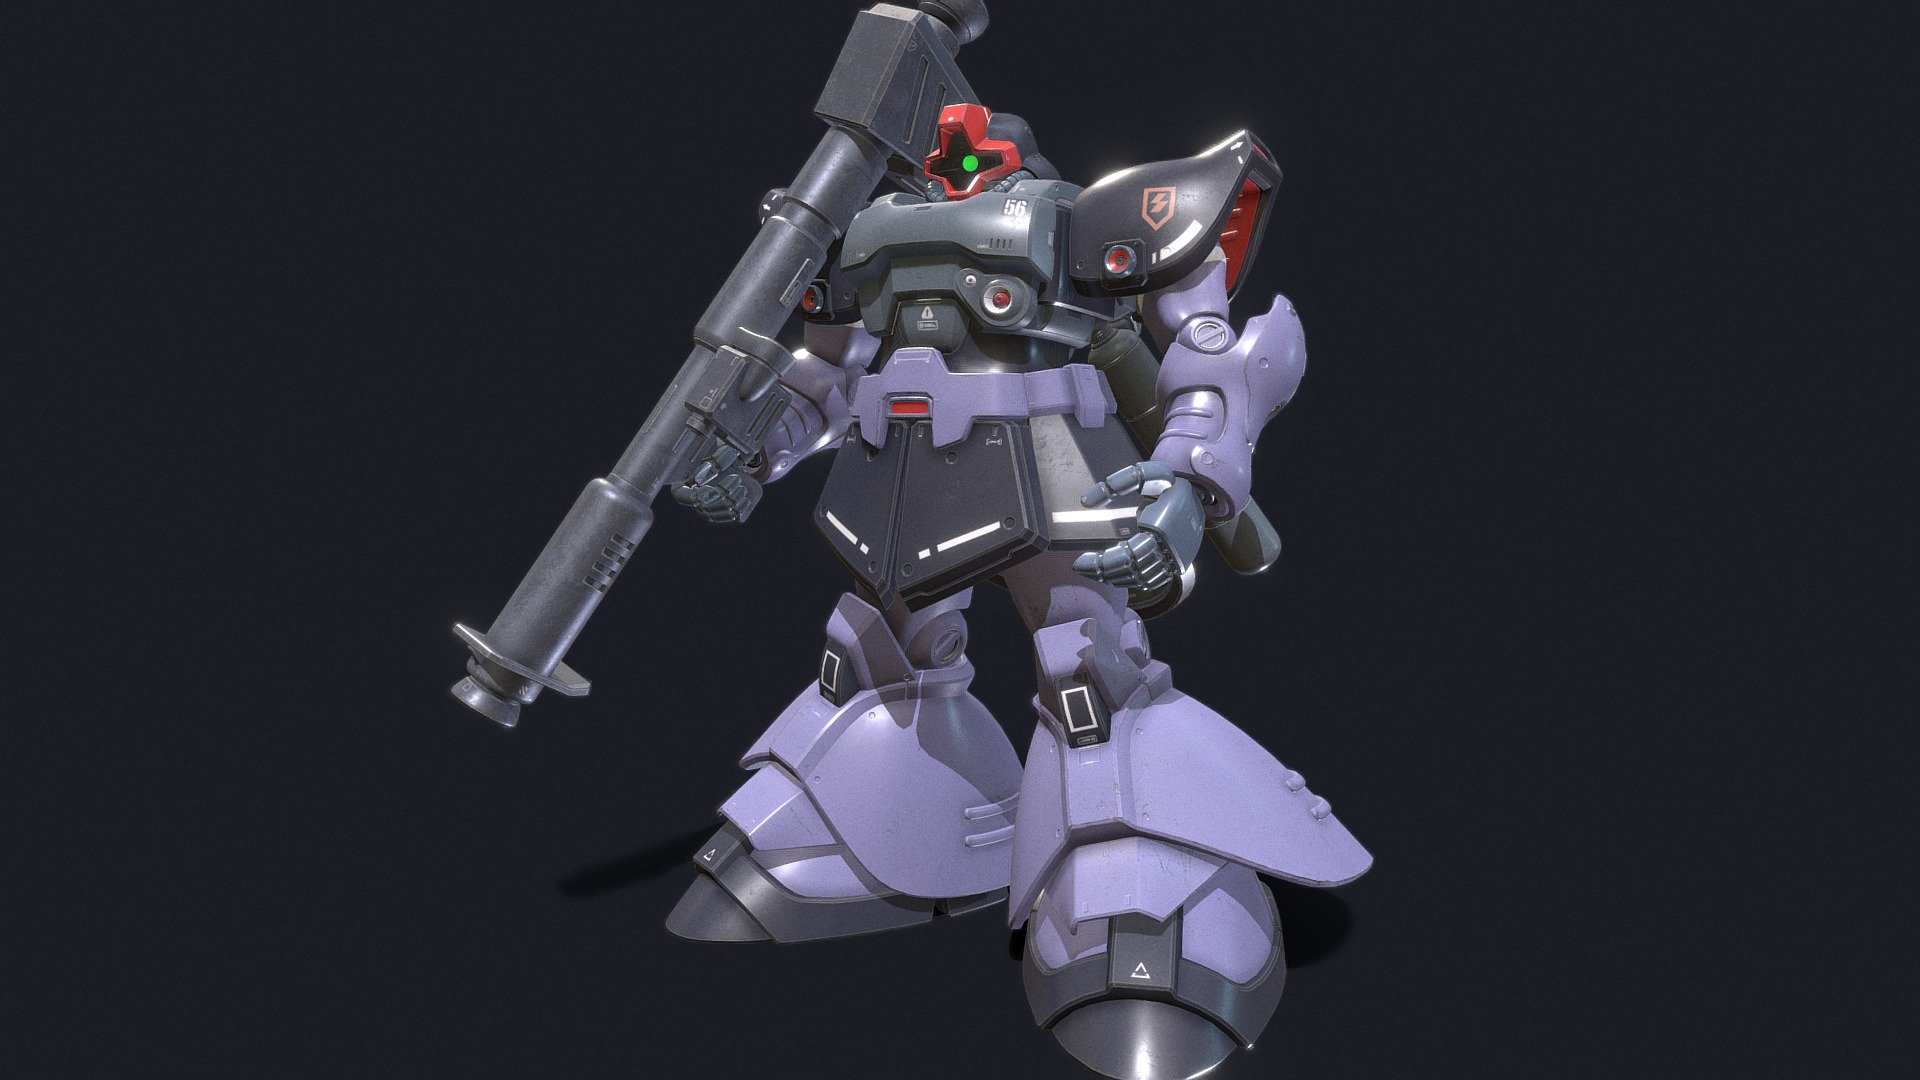 I made my favorite Gundam to practice making robots with Maya.
The texture was created by the substance painter.
I have uploaded a rendering cut to Artstation, so please take a look if you like it 3d model